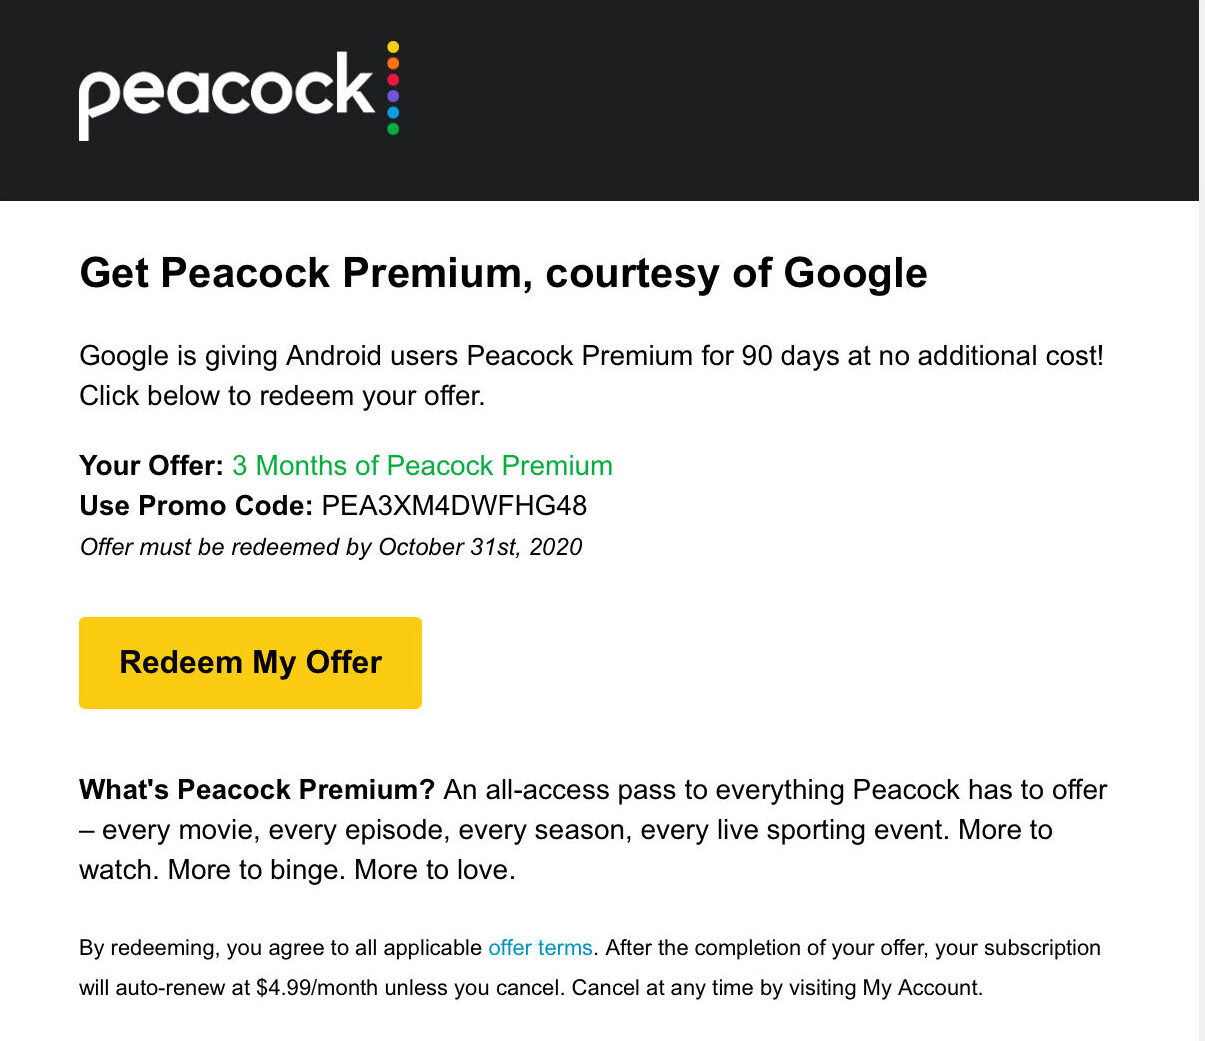 Peacock will send you an email to confirm.